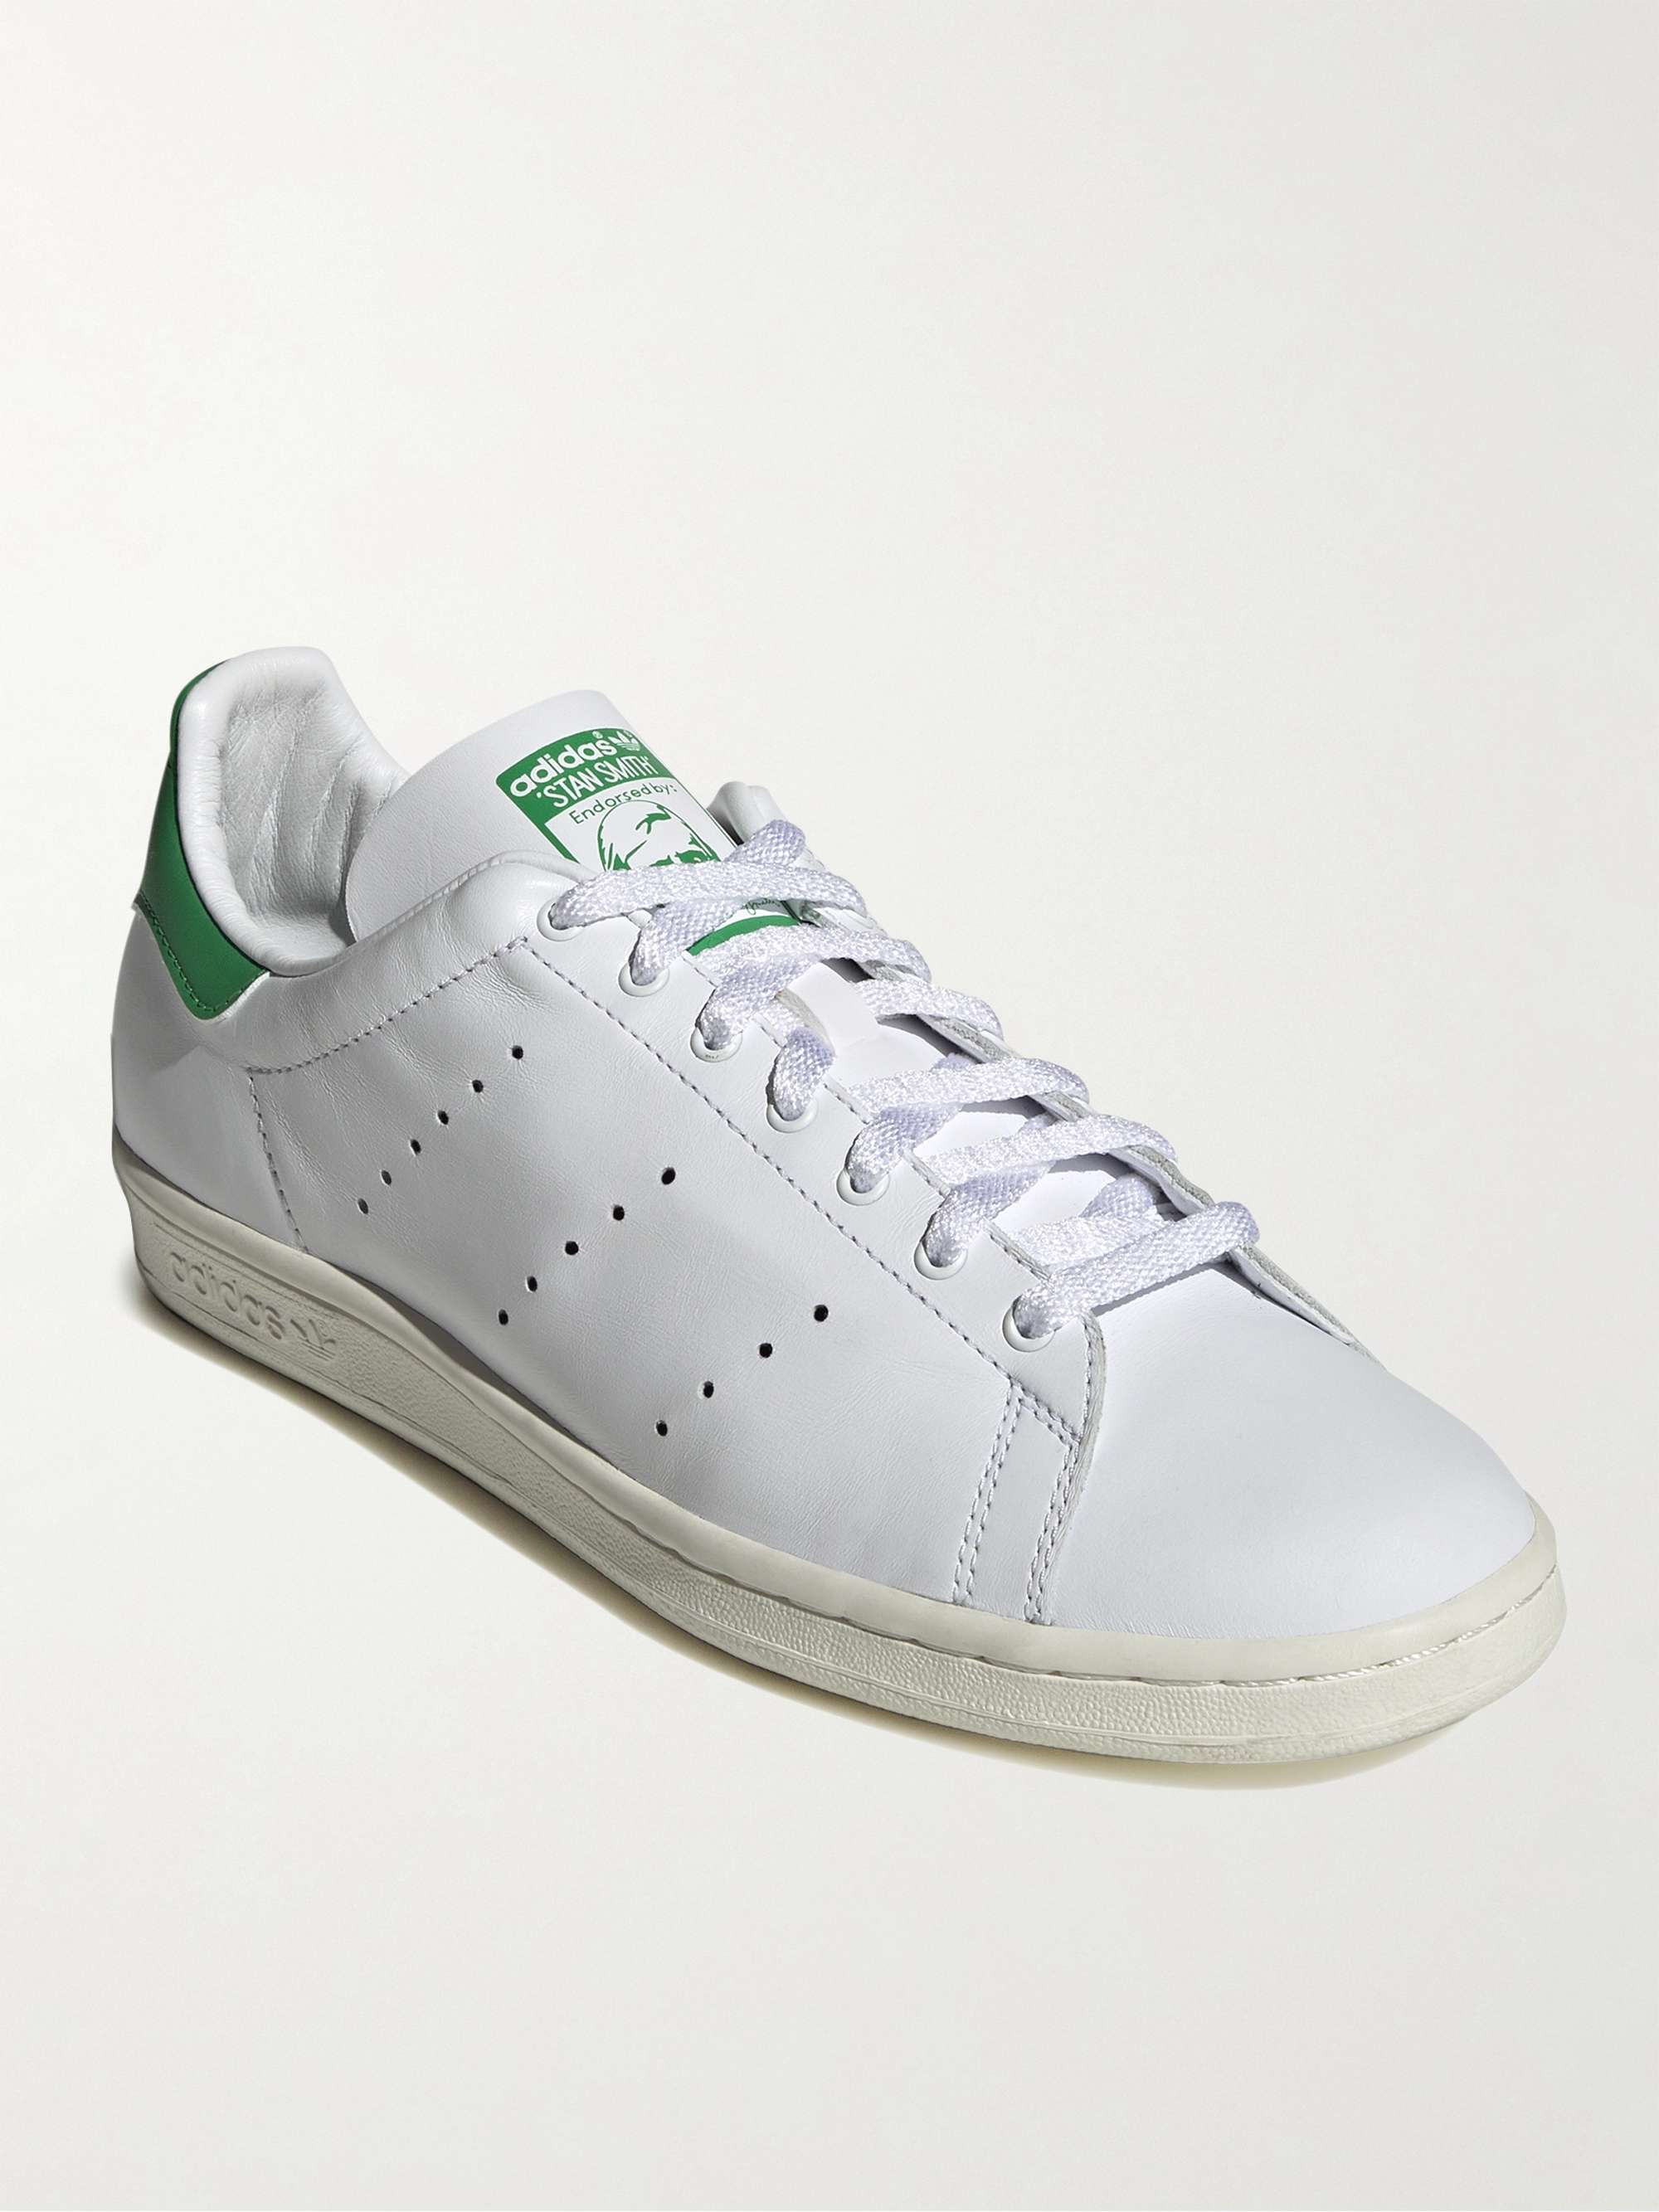 Sneakers ADIDAS ORIGINALS 80s MR for Stan Men | Leather PORTER Smith